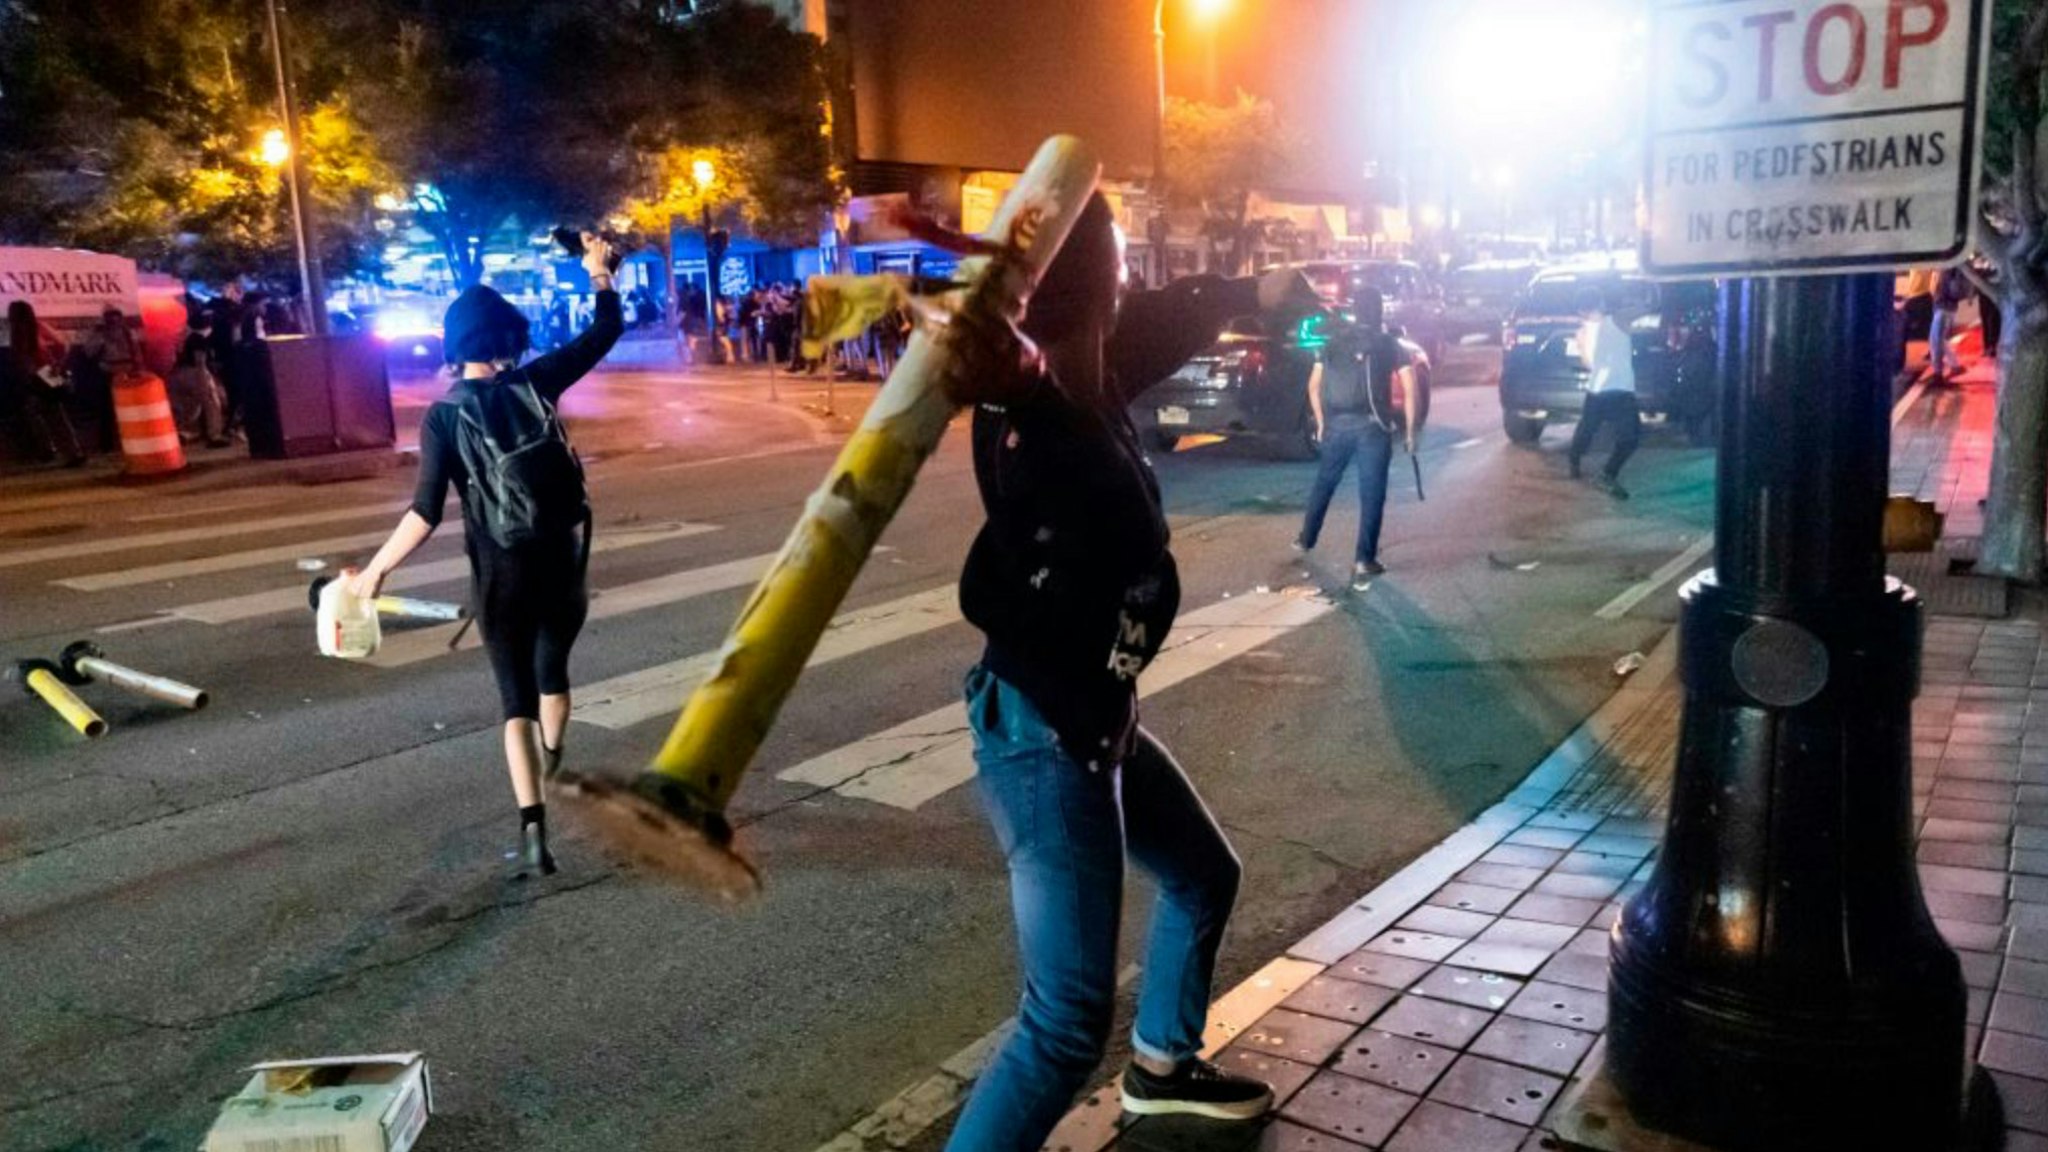 Protesters face off with police during rioting and protests in Atlanta on May 29, 2020.